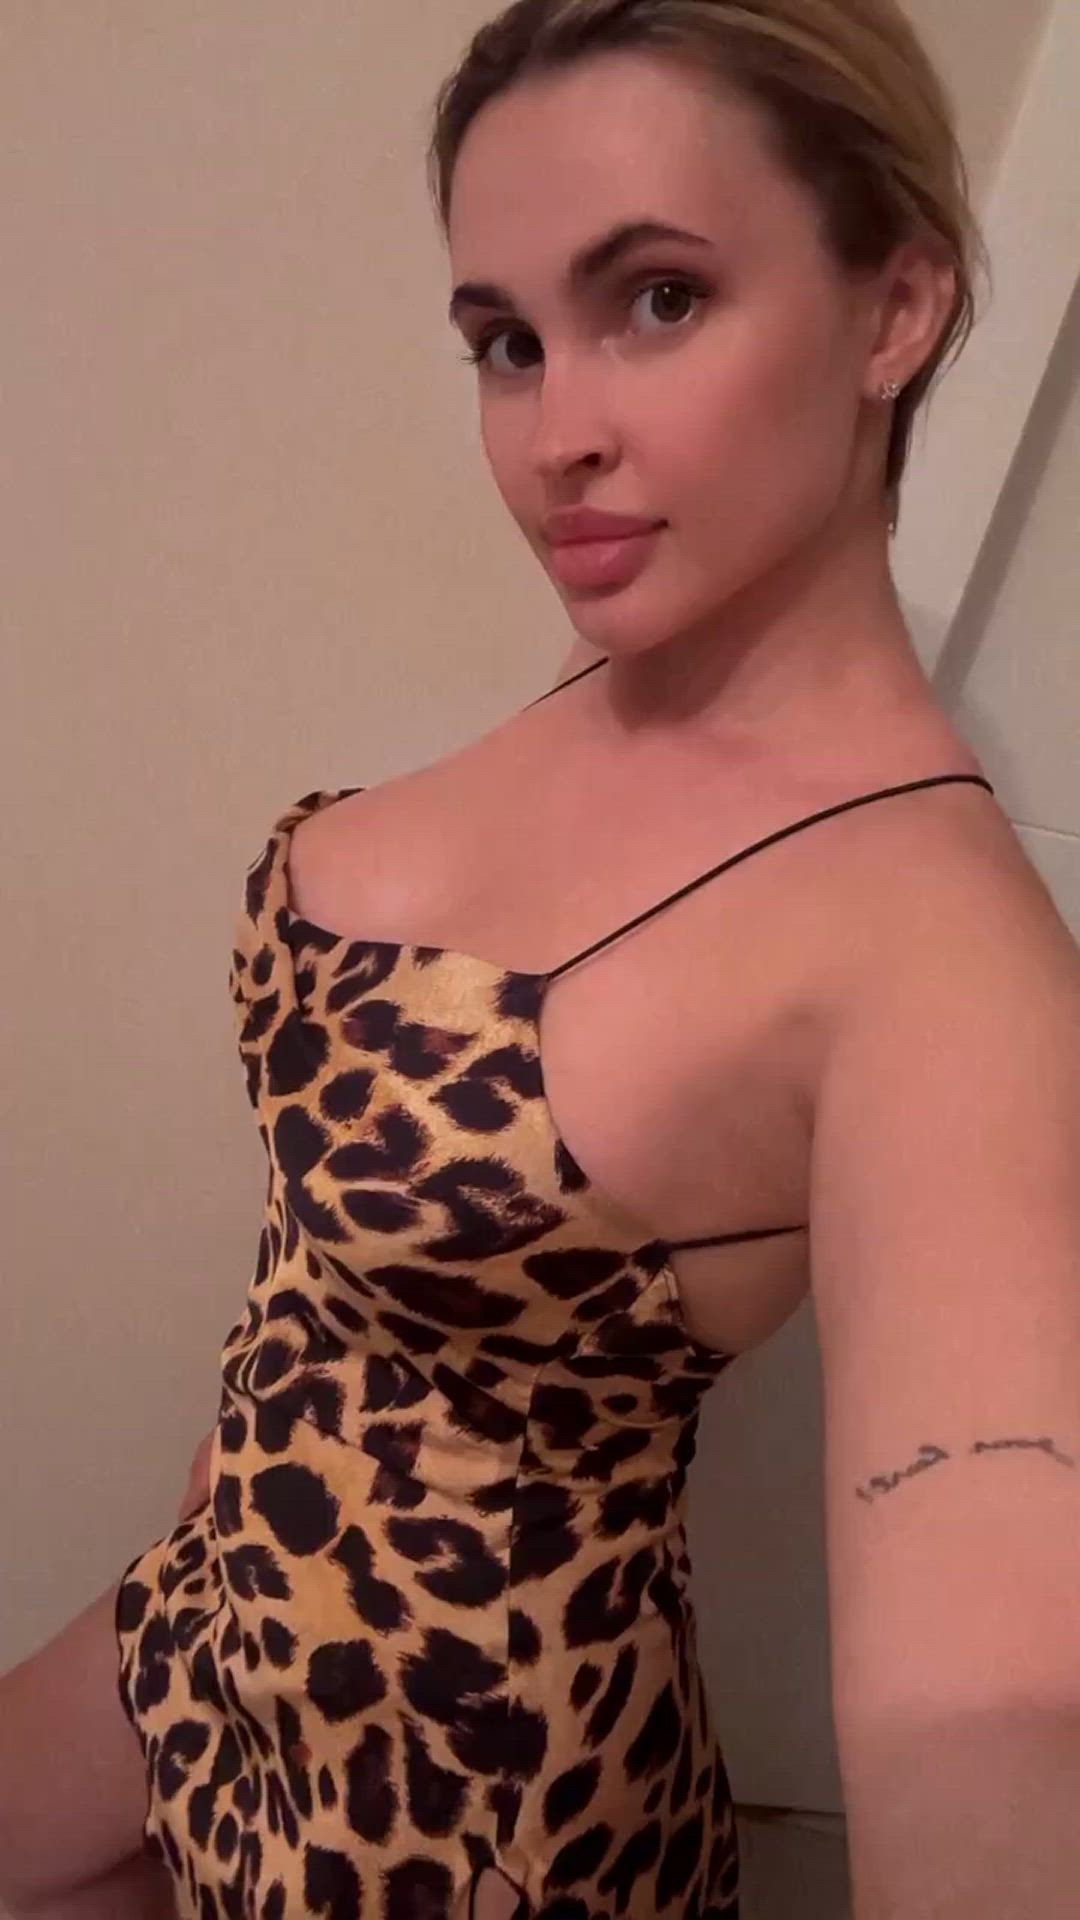 Big Tits porn video with onlyfans model yourmommylovesu <strong>@nikky_titty</strong>